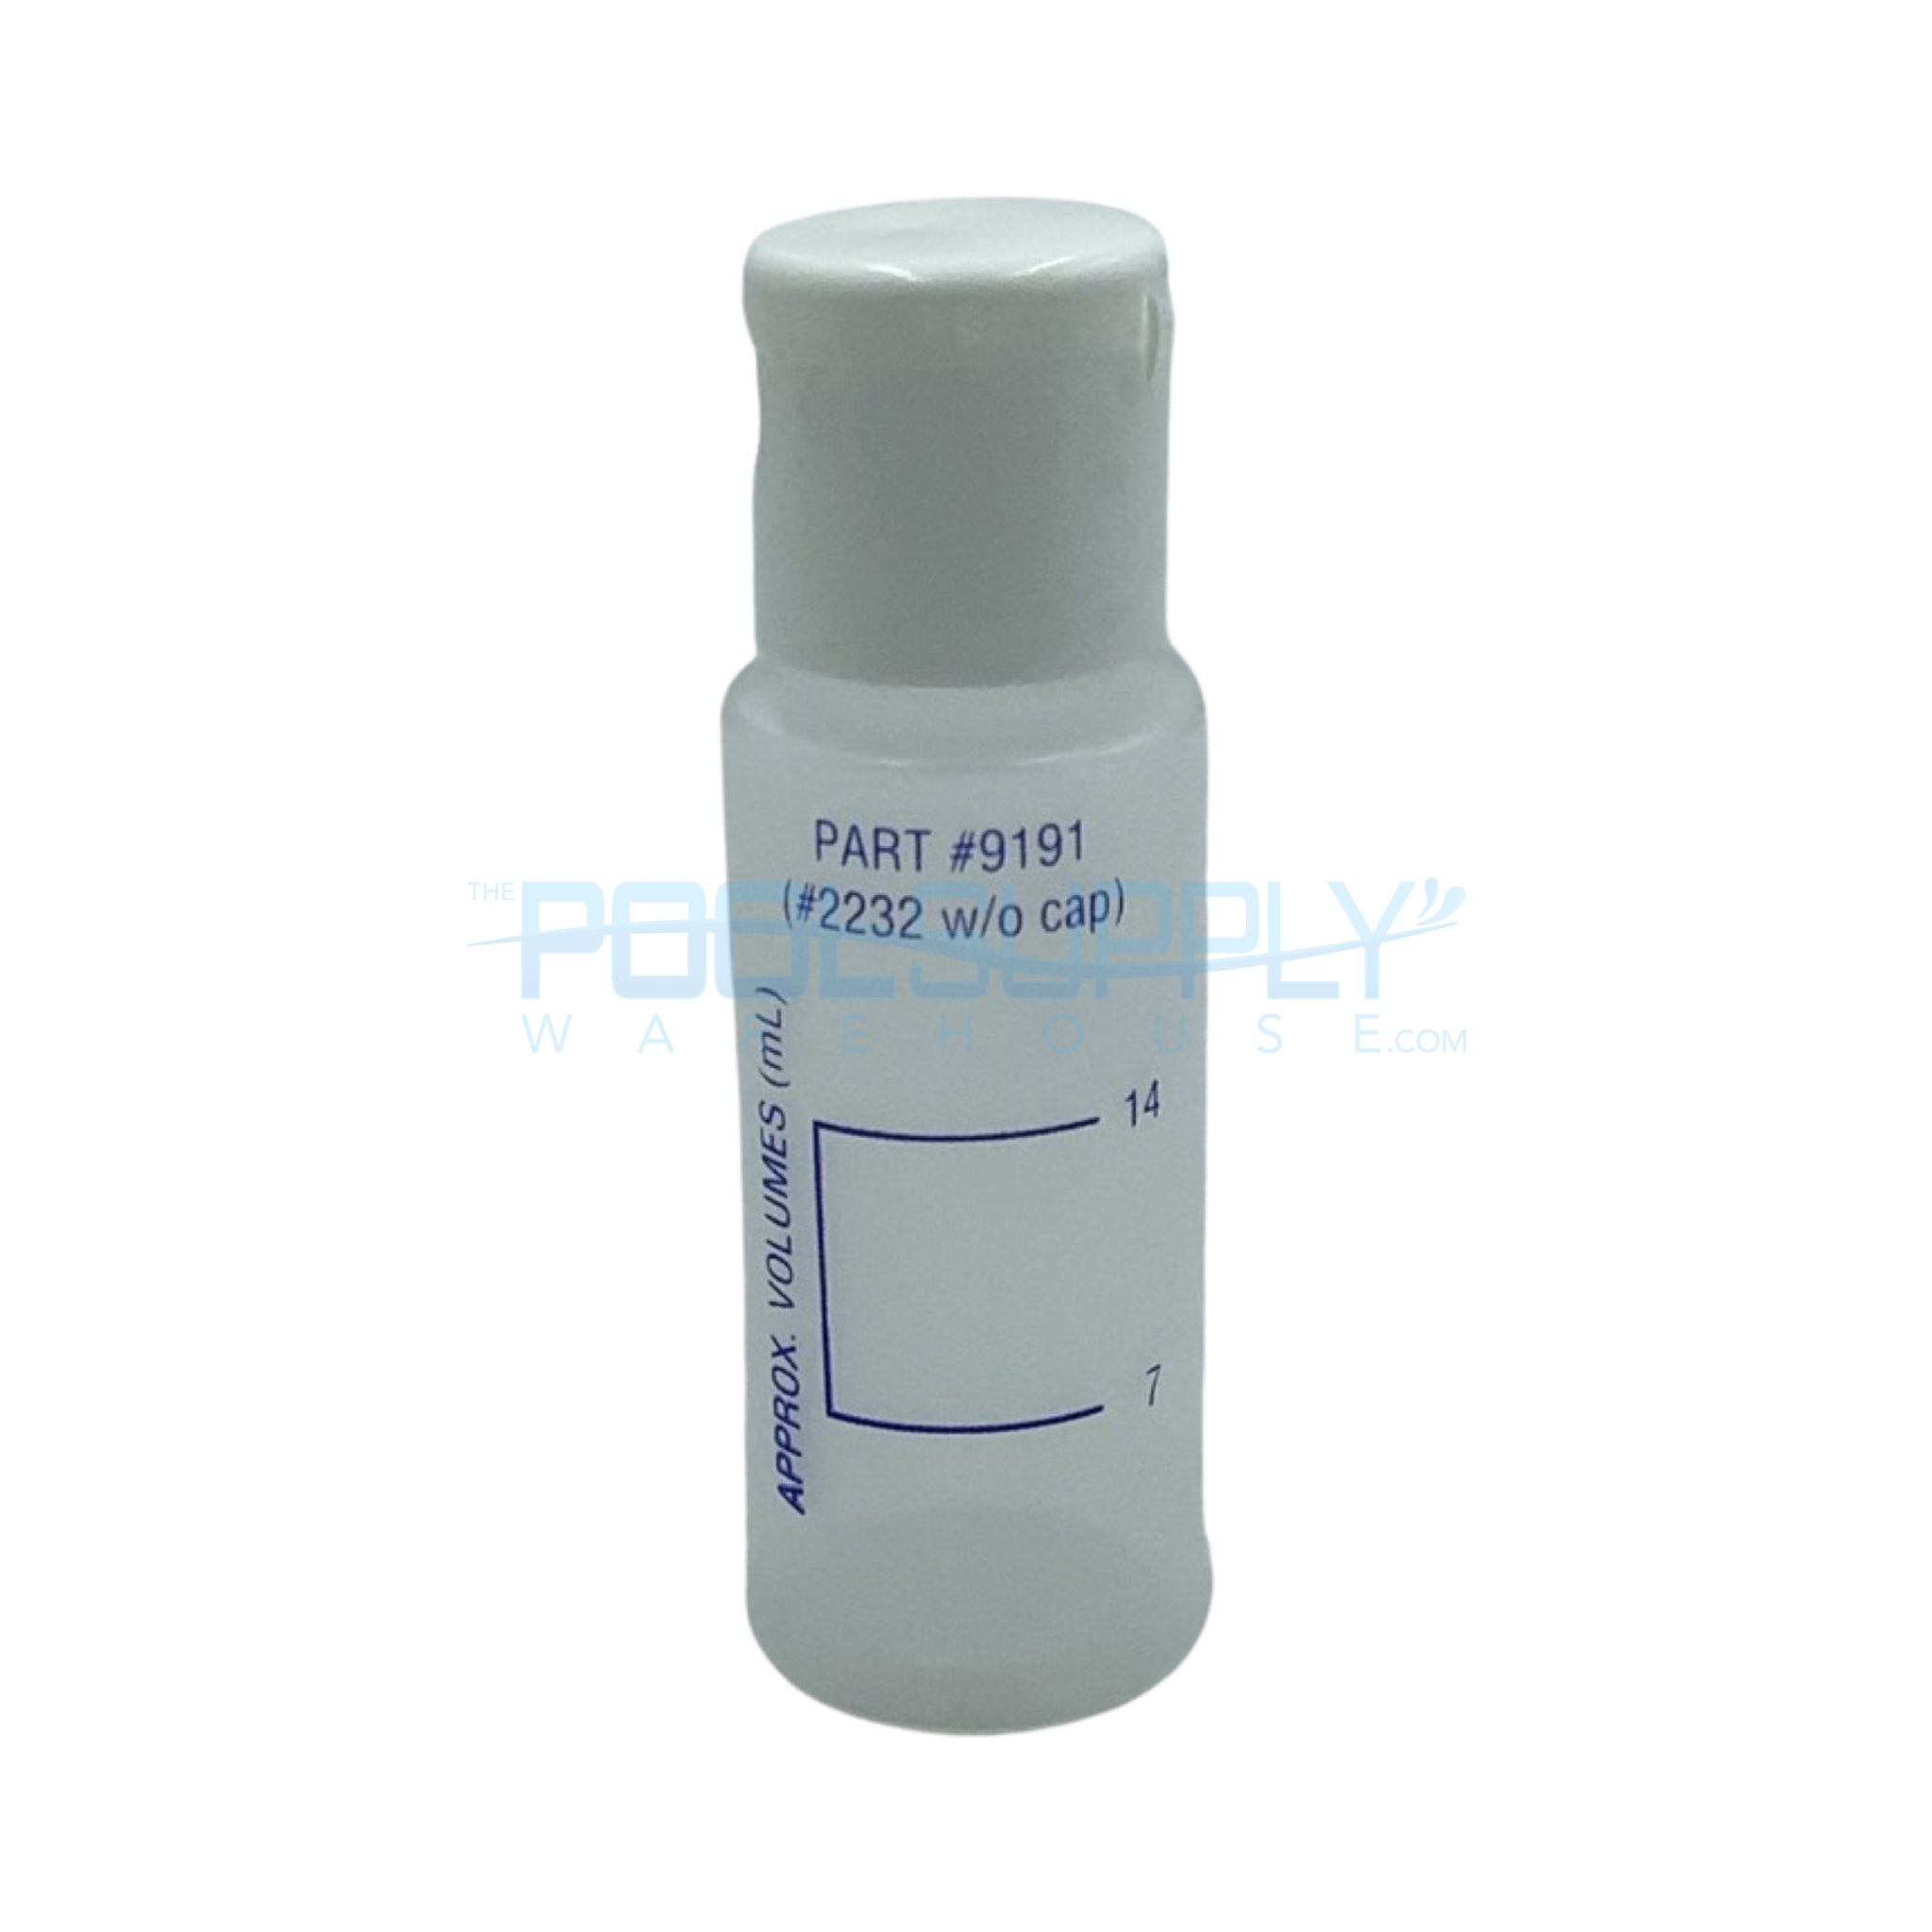 Taylor 7/14 mL Calibrated Bottle with Dispenser Cap For Cyanuric Acid - 9191 - The Pool Supply Warehouse